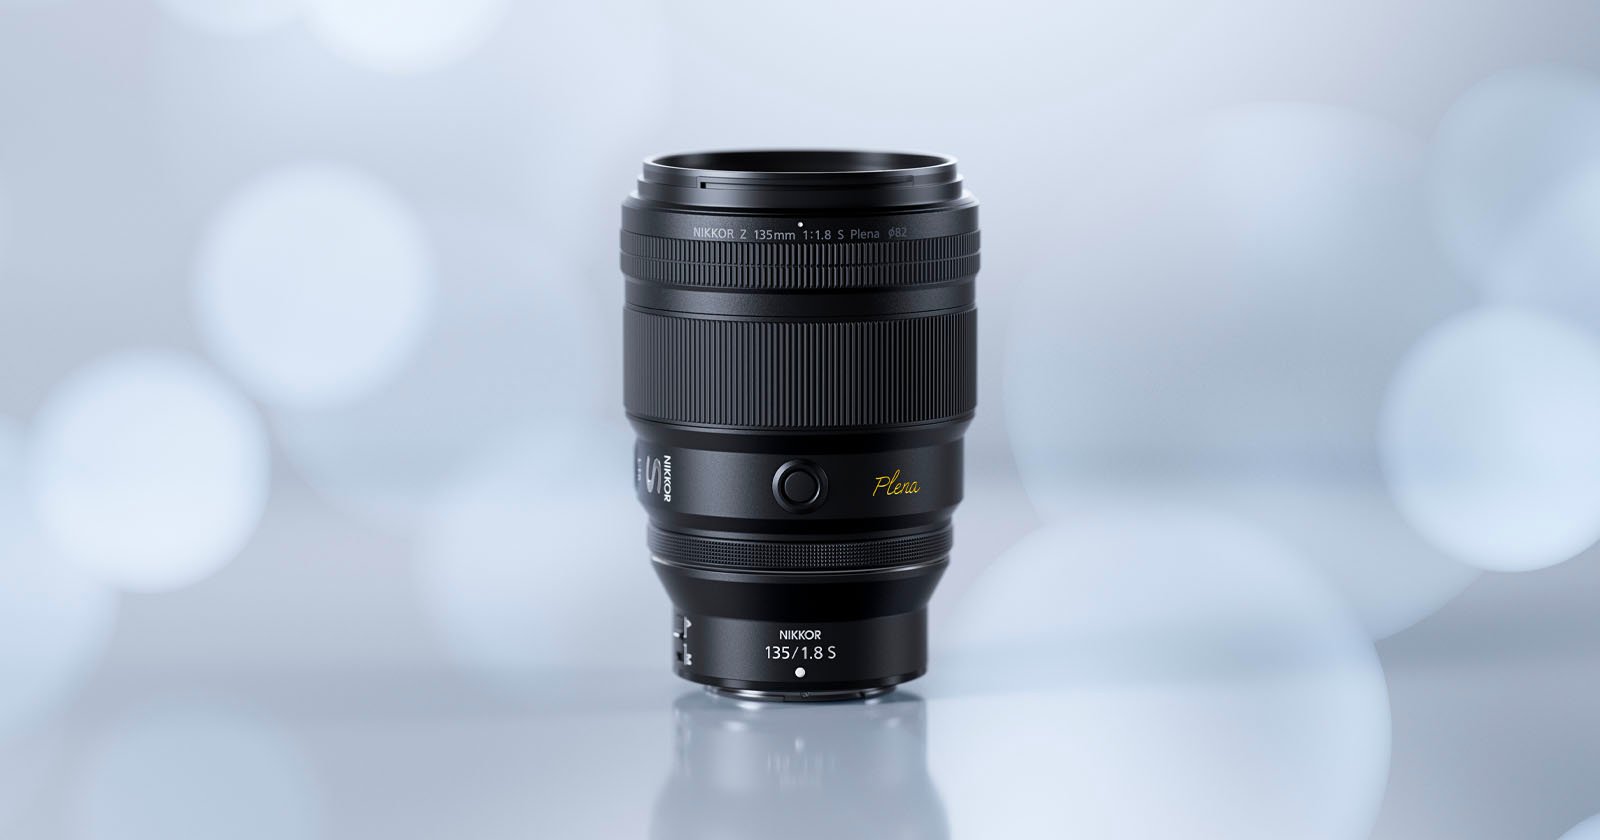 The Nikon Plena is a Super-Sharp 135mm f/1.8 S with Perfect Bokeh